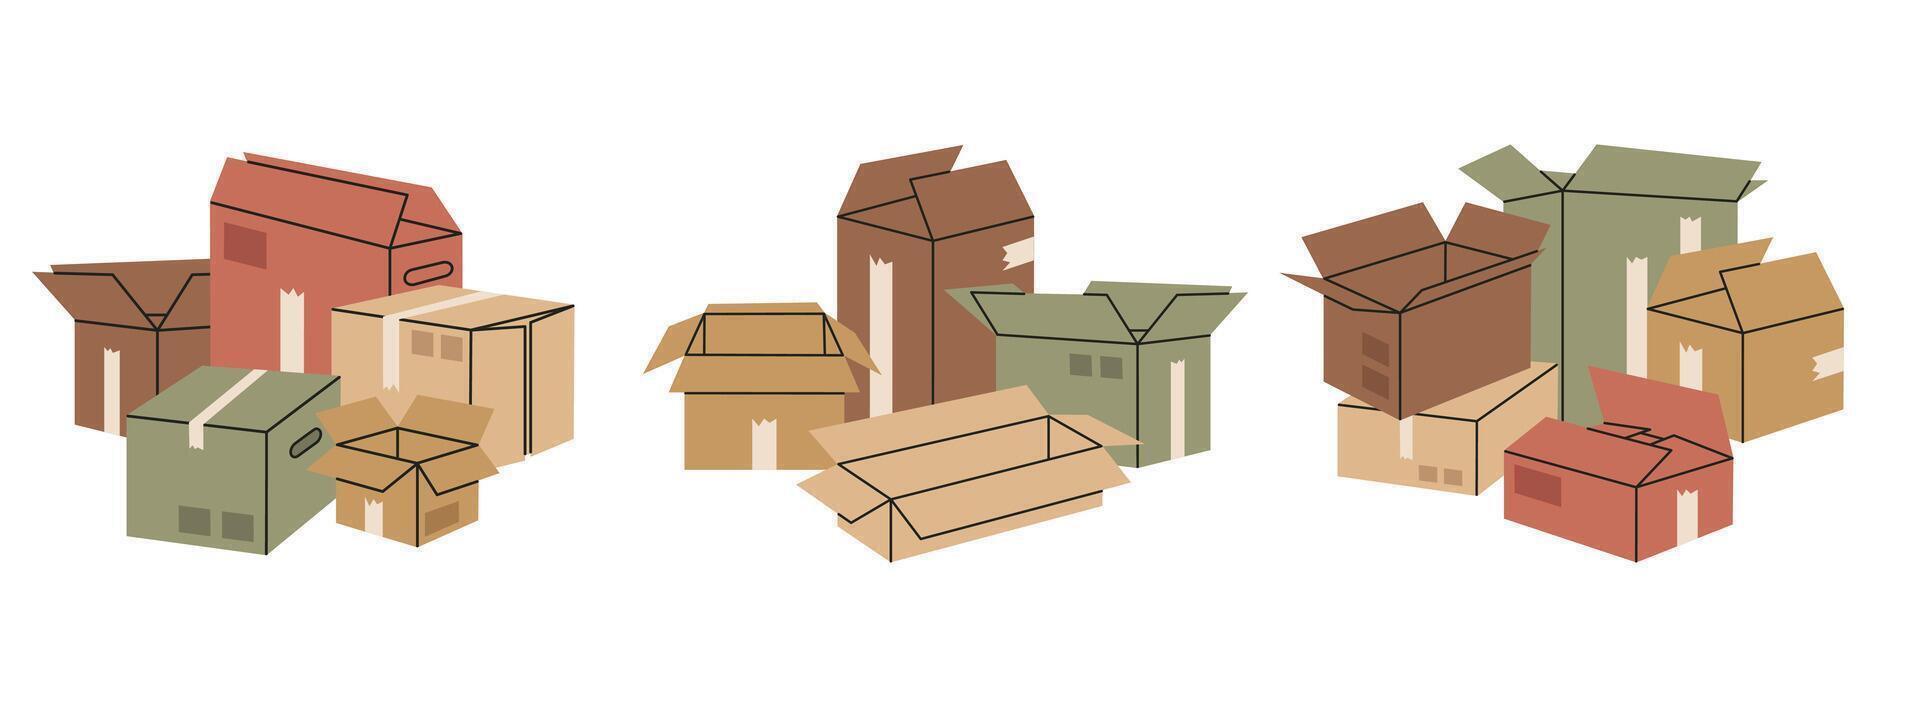 Hand drawn cargo boxes. Stacked cardboard boxes, warehouse box stack, boxes pile flat illustration set. Delivery or moving concept vector